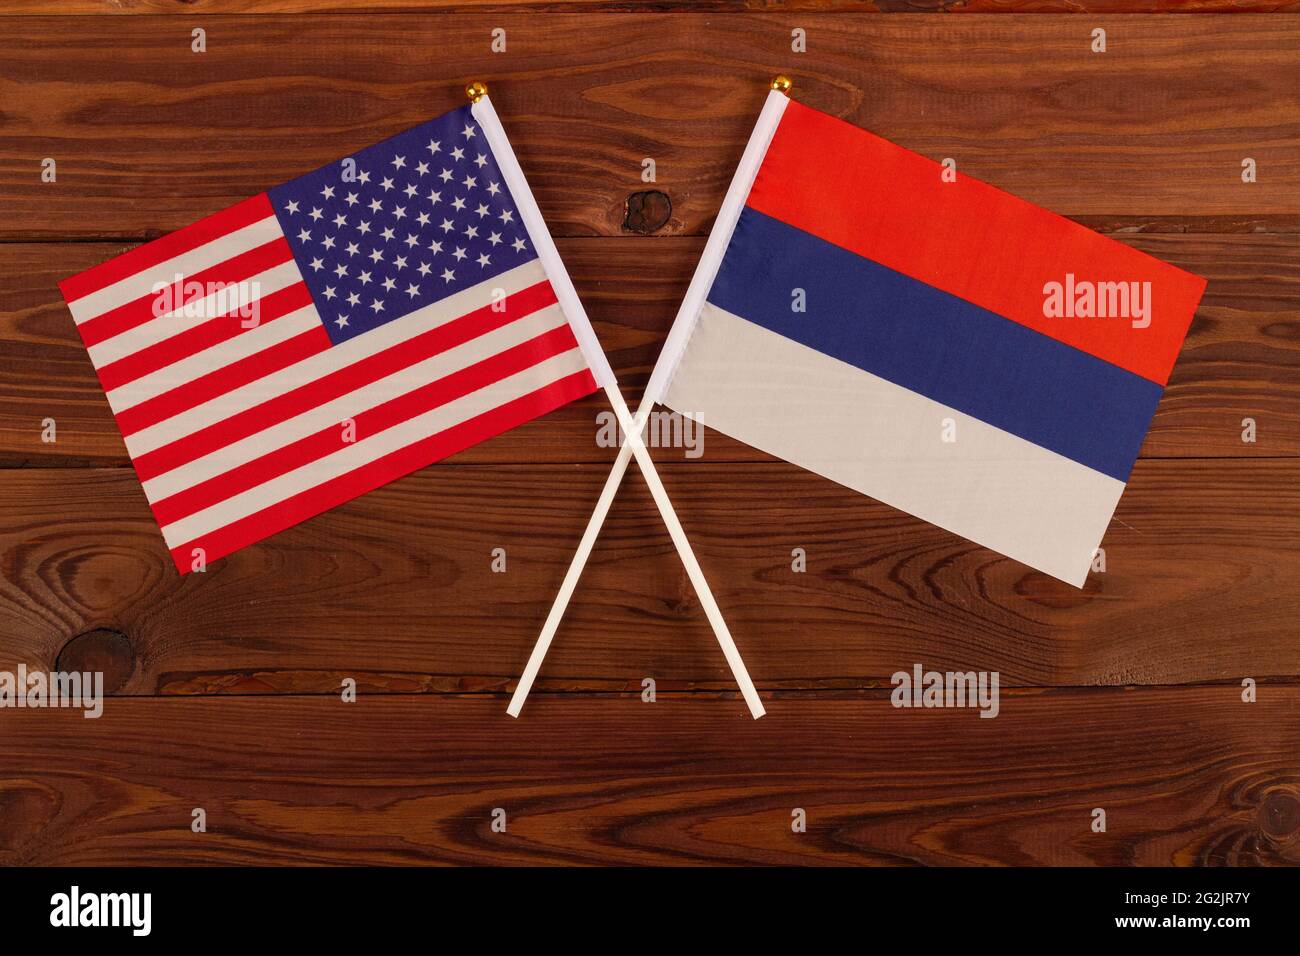 USA flag and Russia flag crossed with each other. USA vs Russia. Meeting between the presidents of the United States and Russia. Tensions in relations Stock Photo